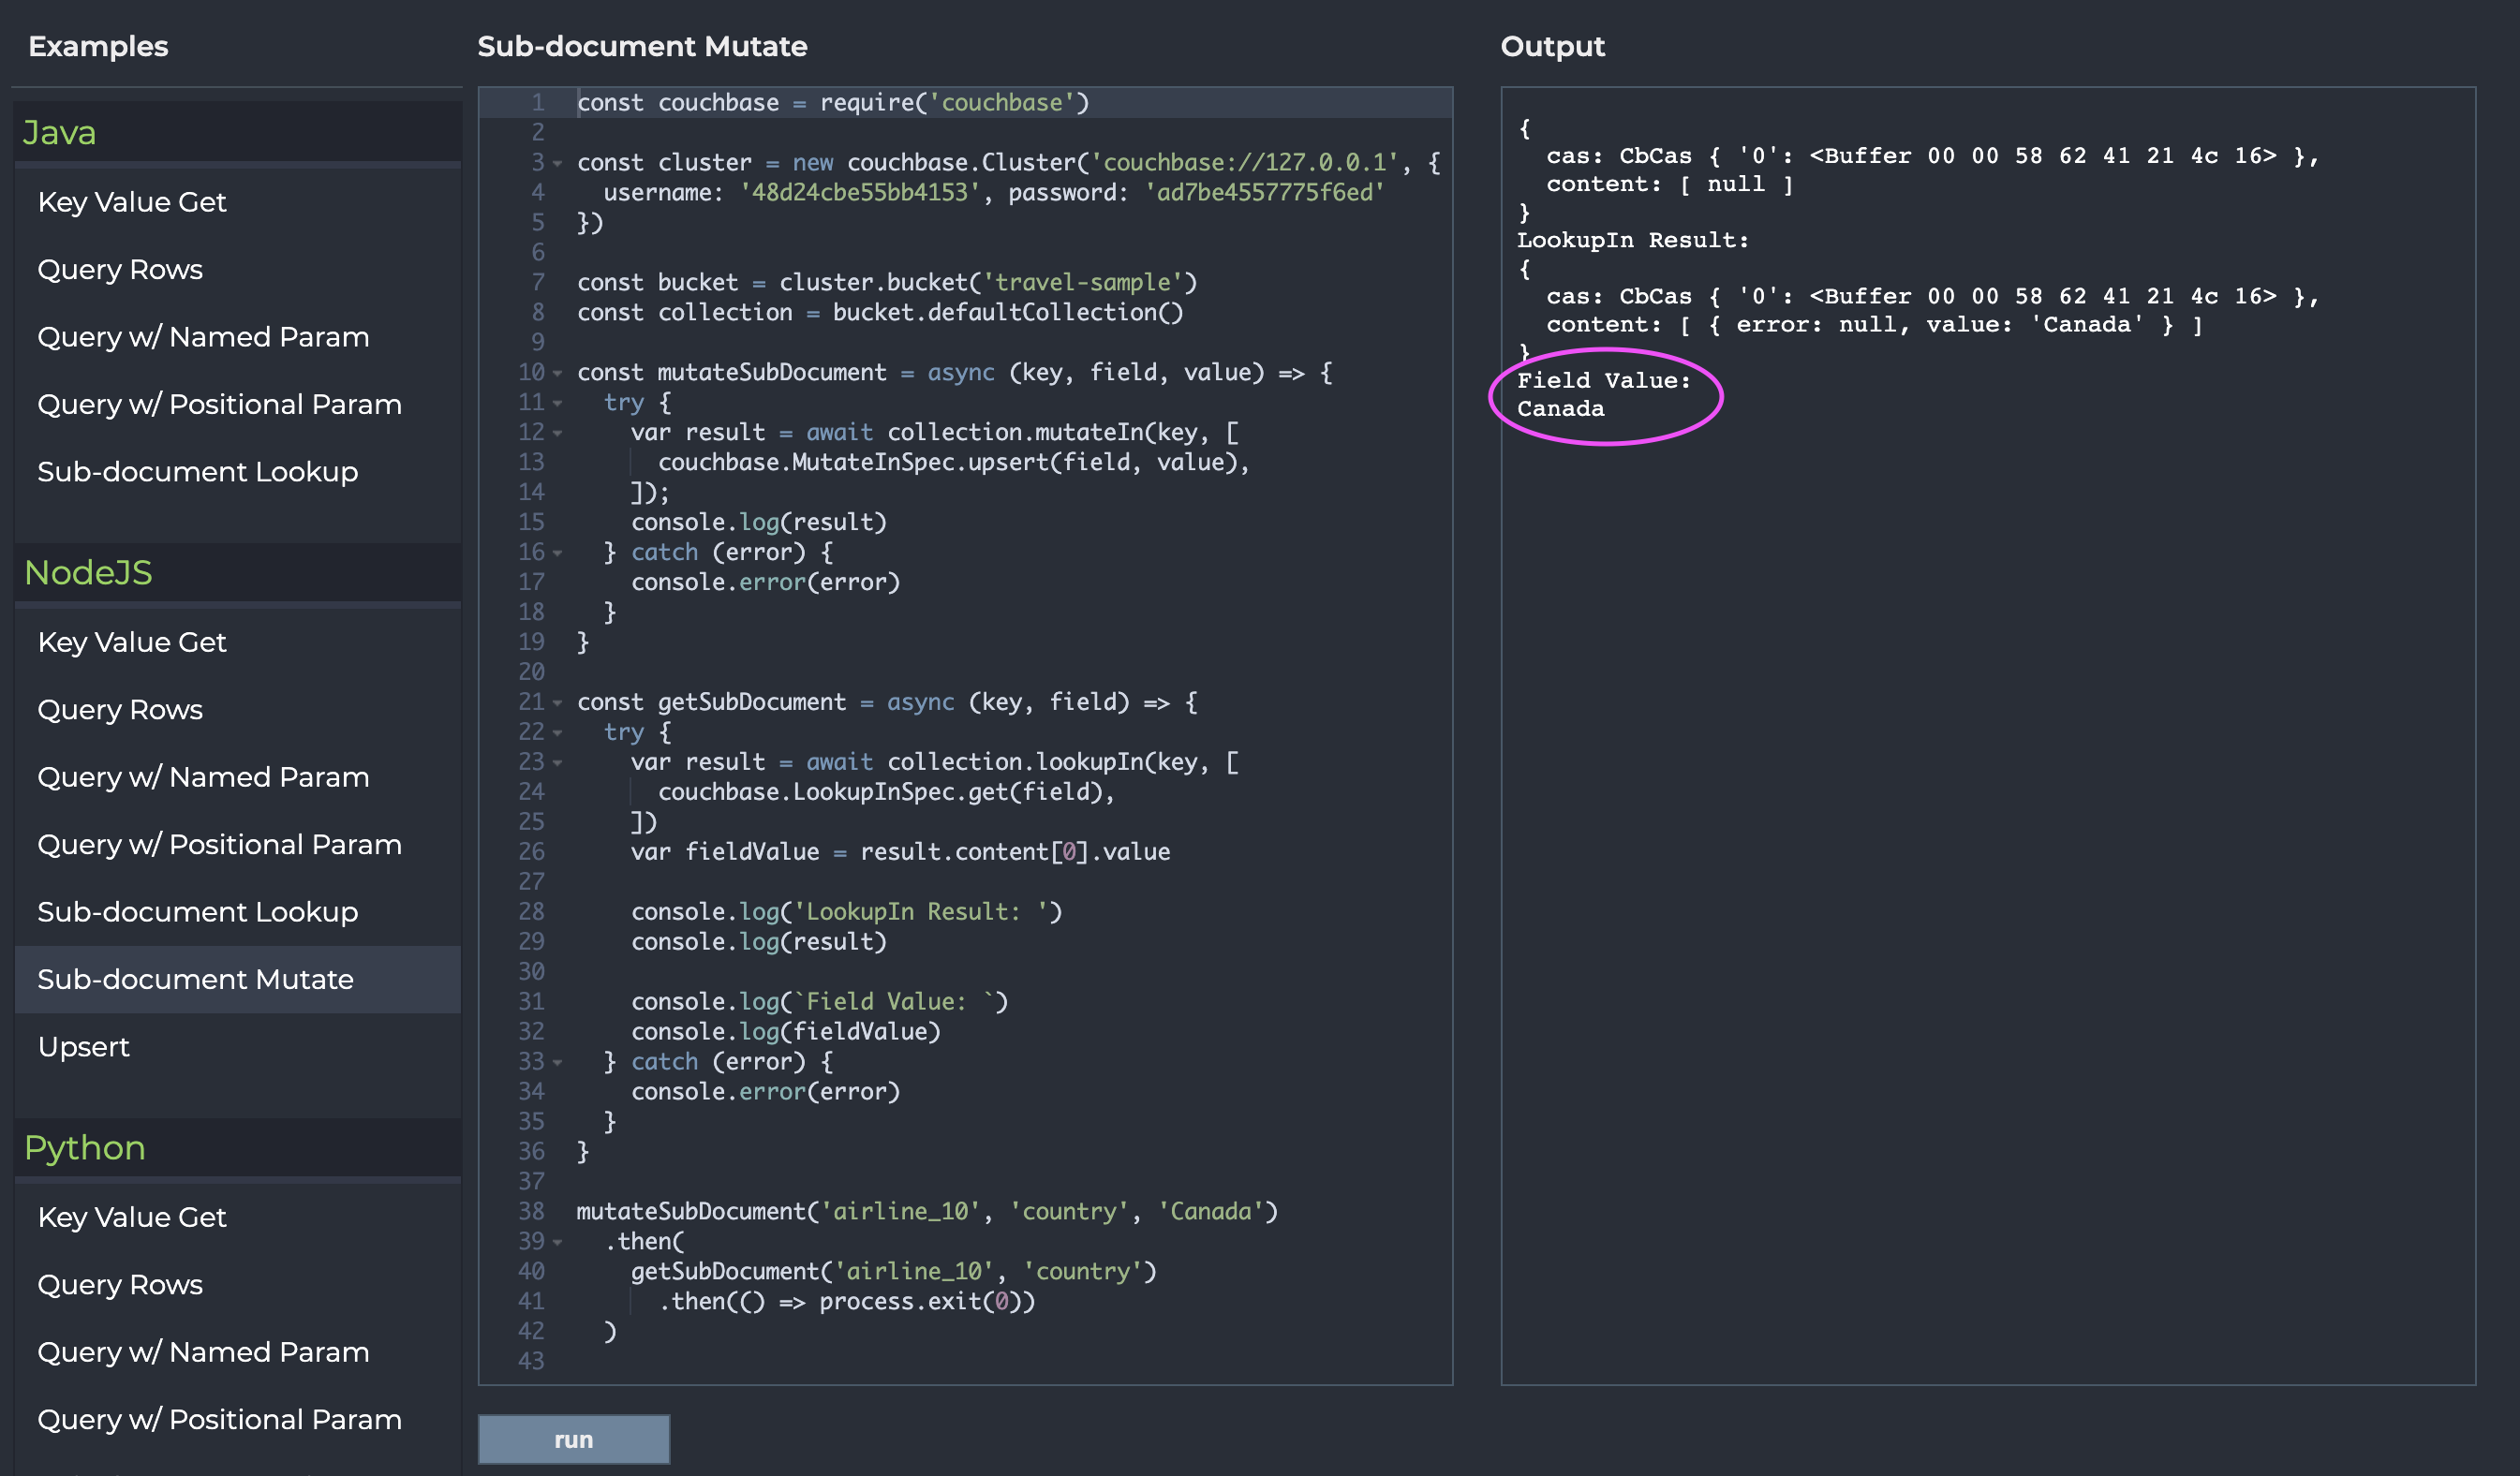 Screenshot of the result of our sub-document mutate code example